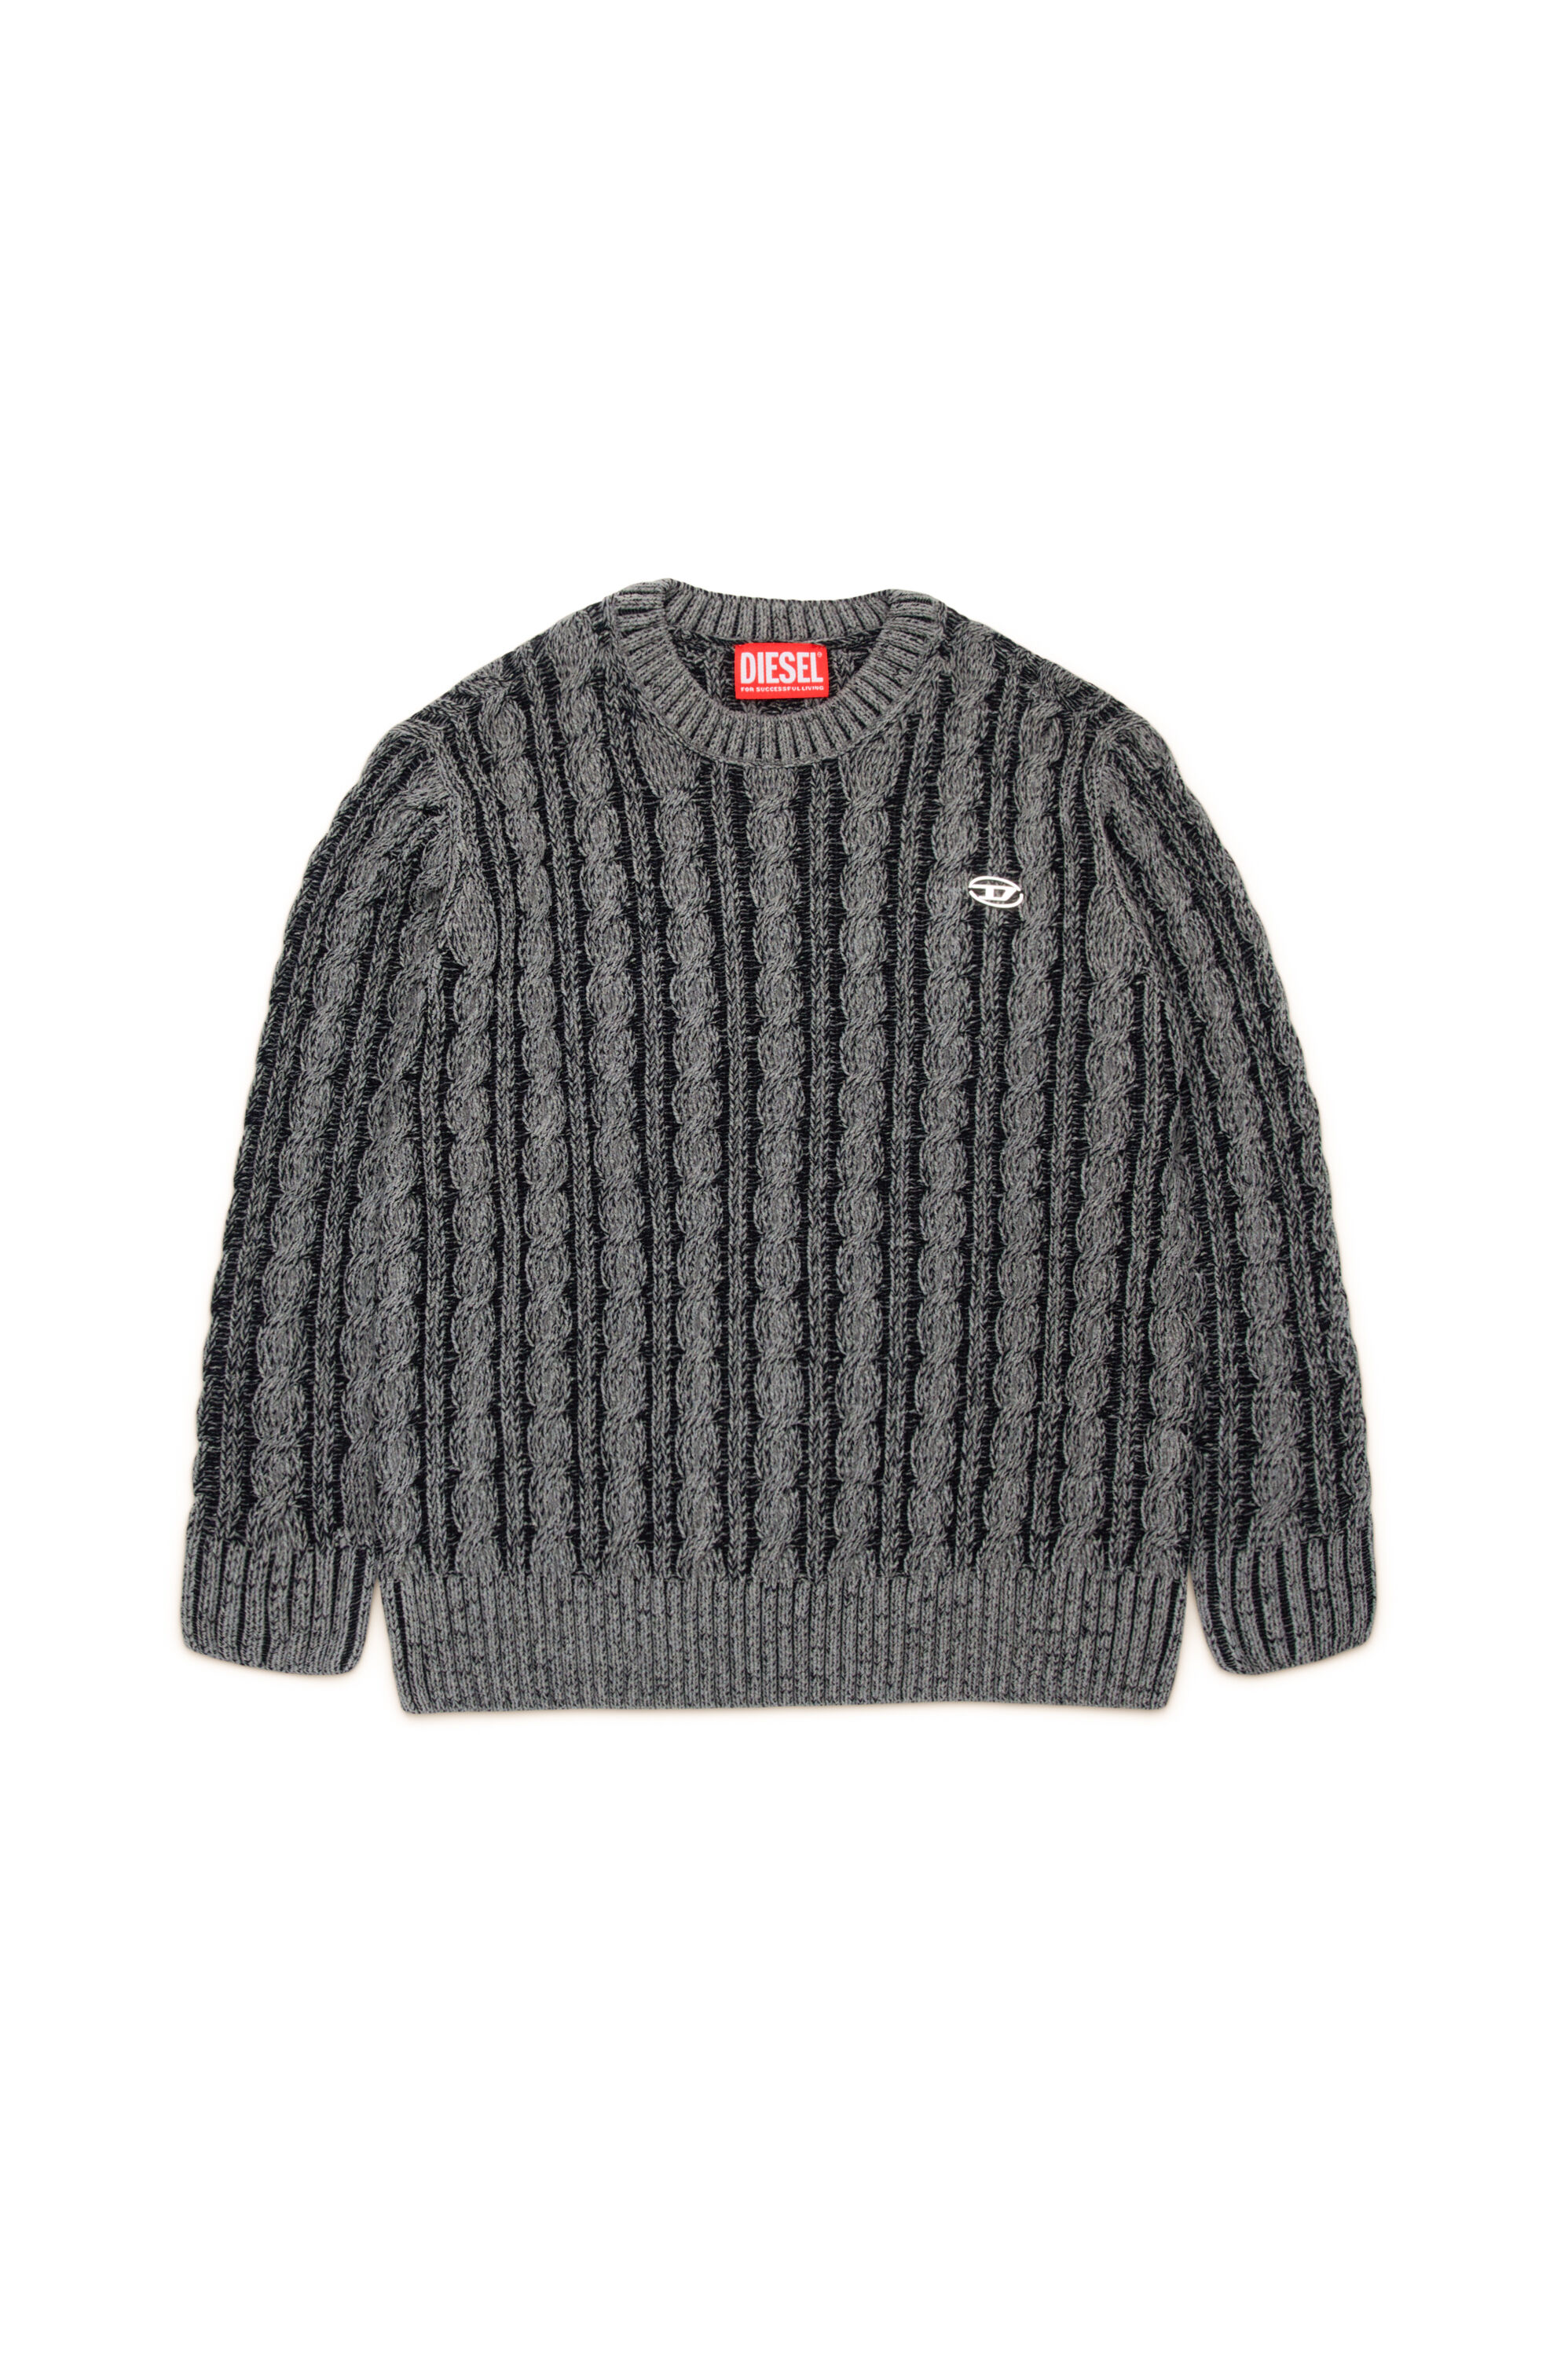 Diesel - KMOXIA OVER, Unisex Cable-knit jumper in two-tone yarn in Black - Image 1